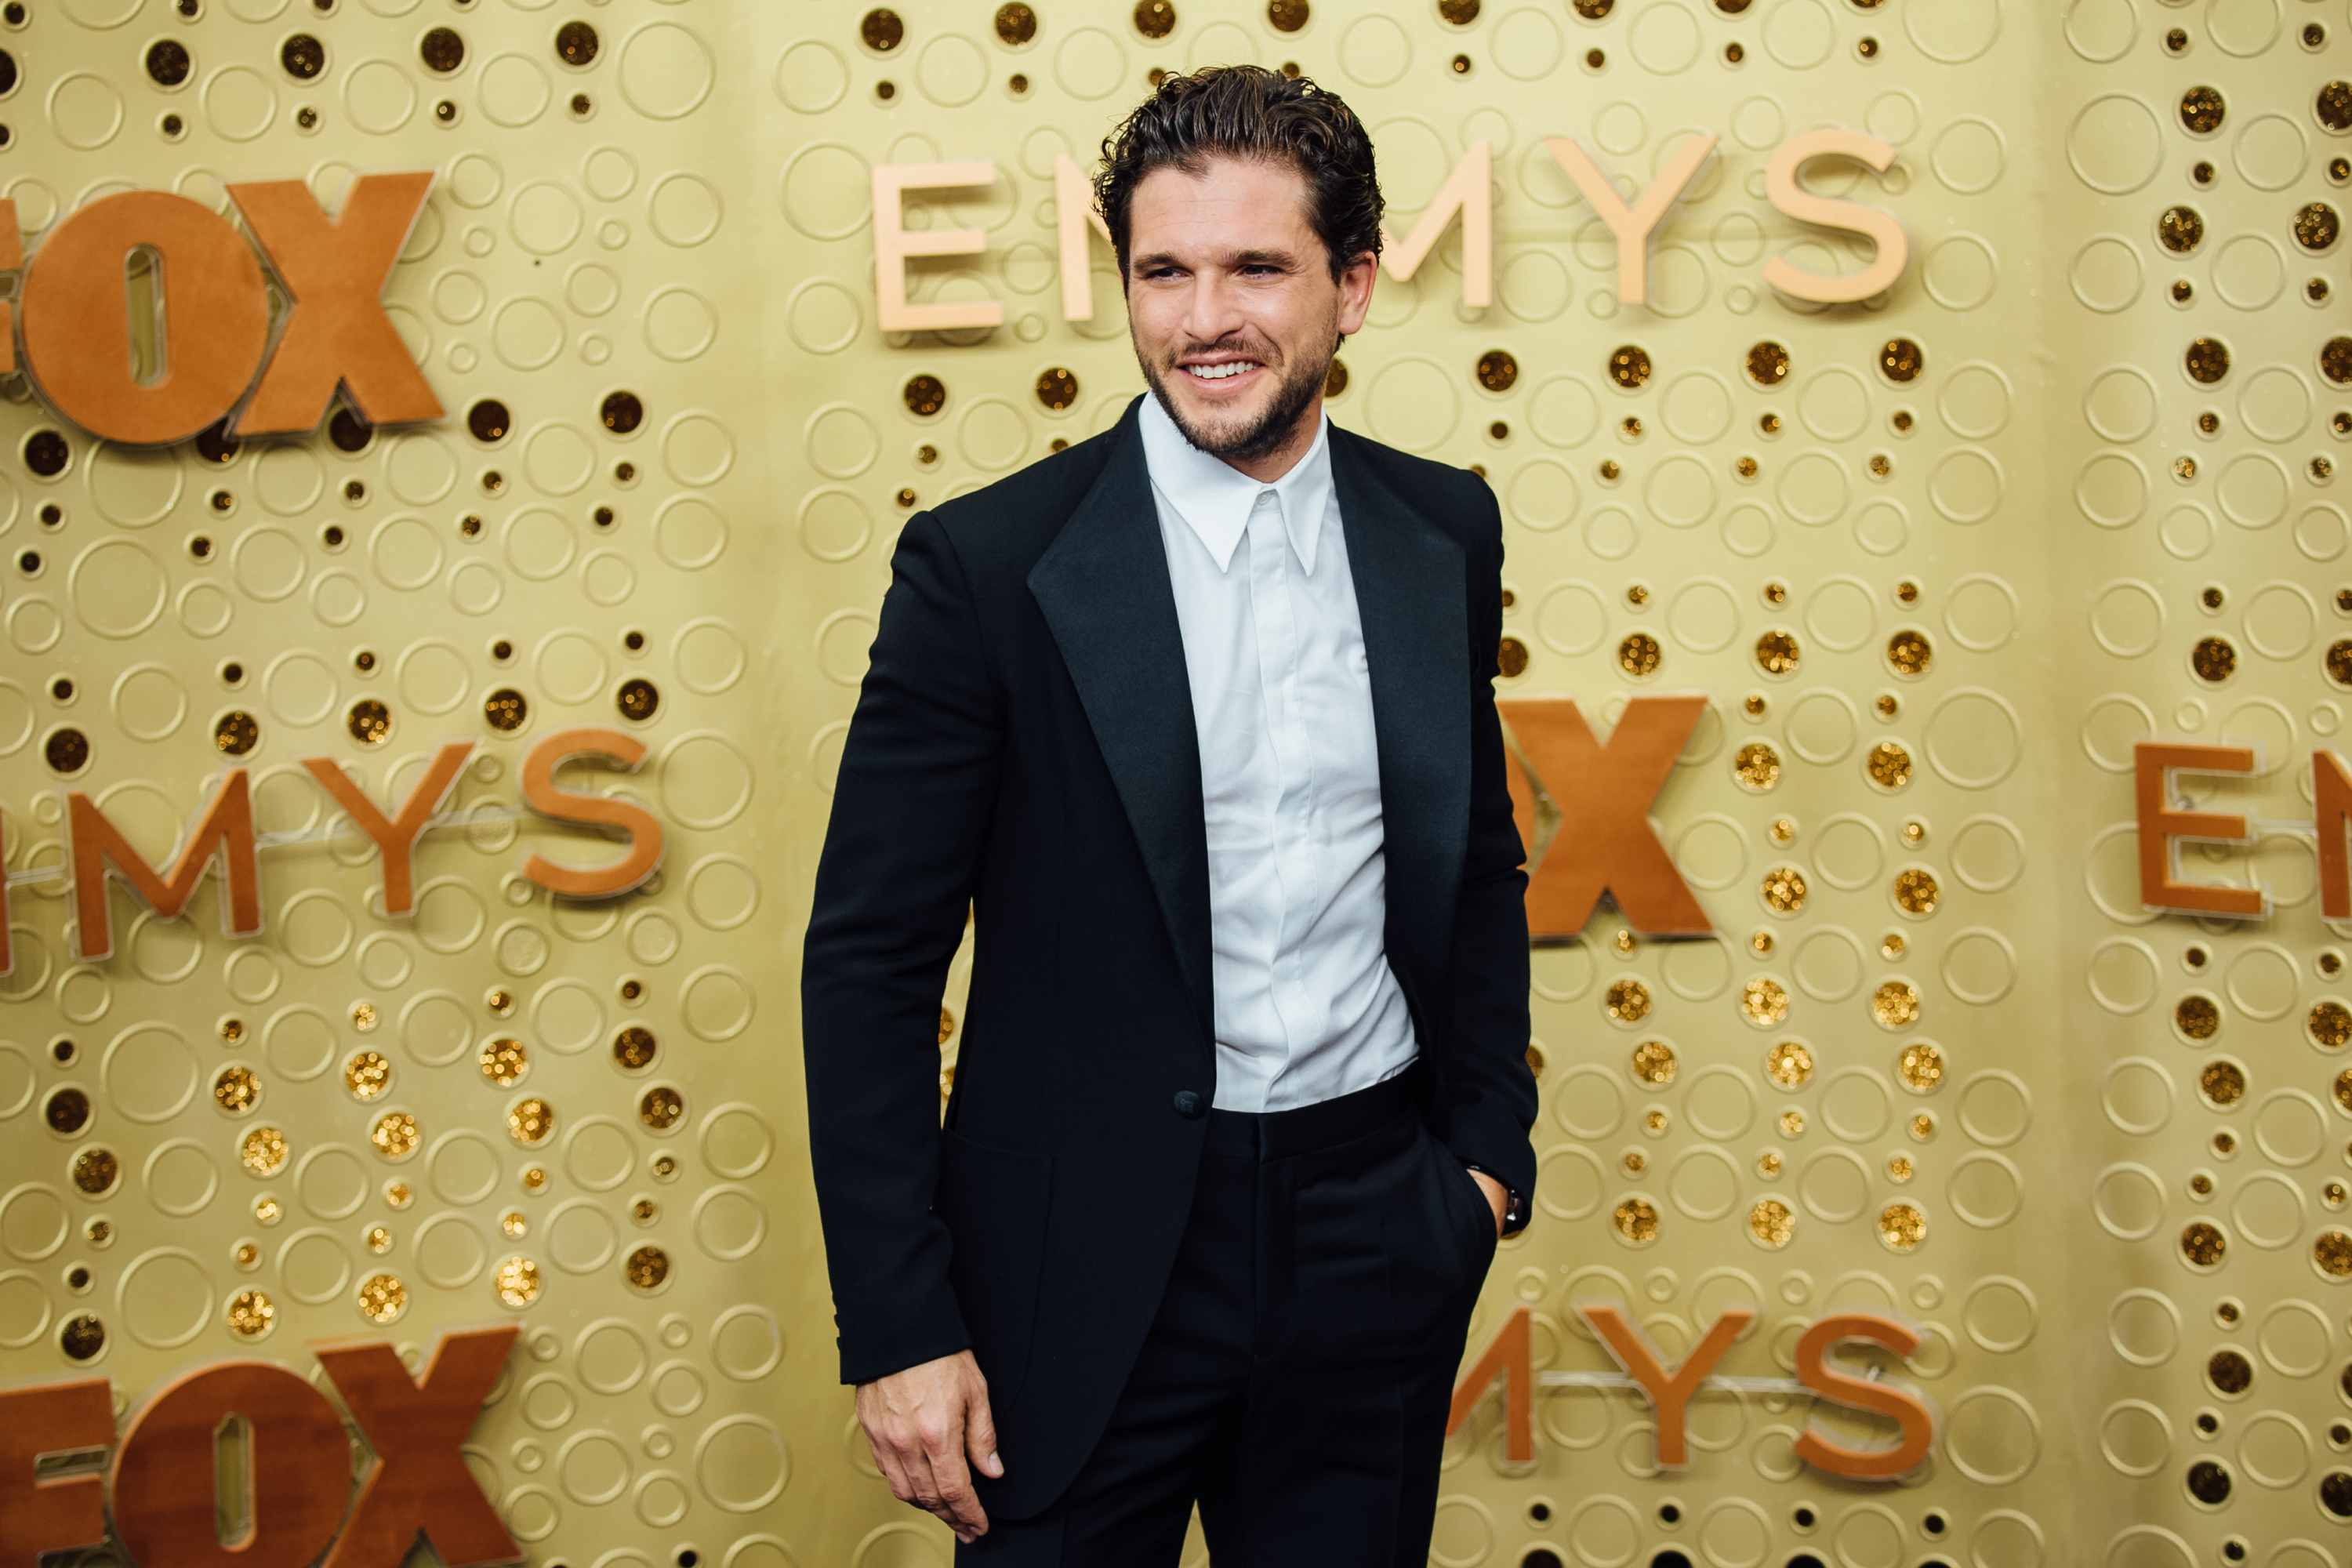 Kit Harrington at the Emmy Awards on September 22, 2019, in Los Angeles. | Source: Getty Images